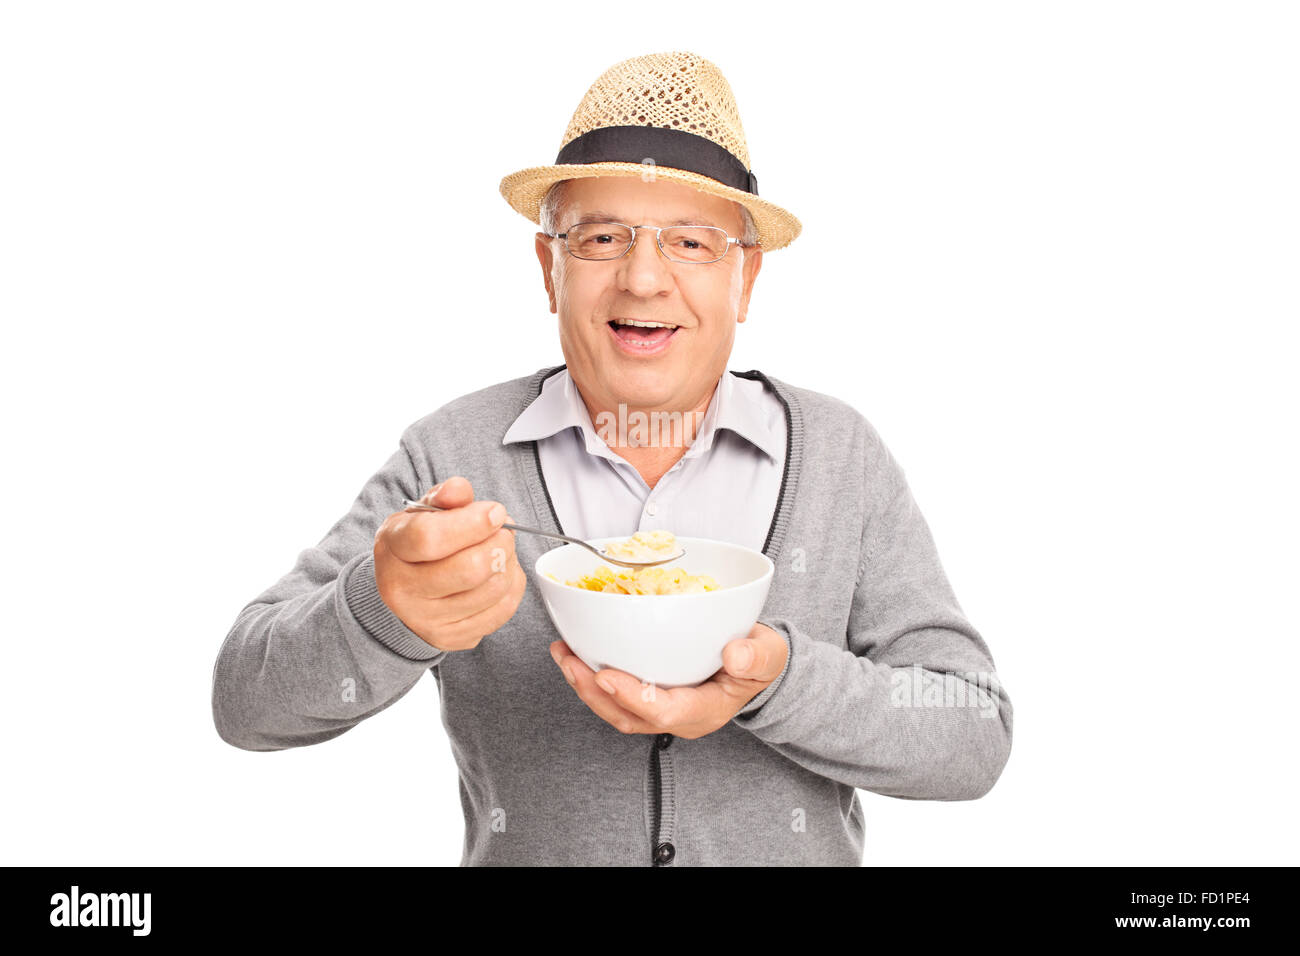 Attractive Elderly Woman Eating Breakfast. Stock Photo, Picture and Royalty  Free Image. Image 109485776.